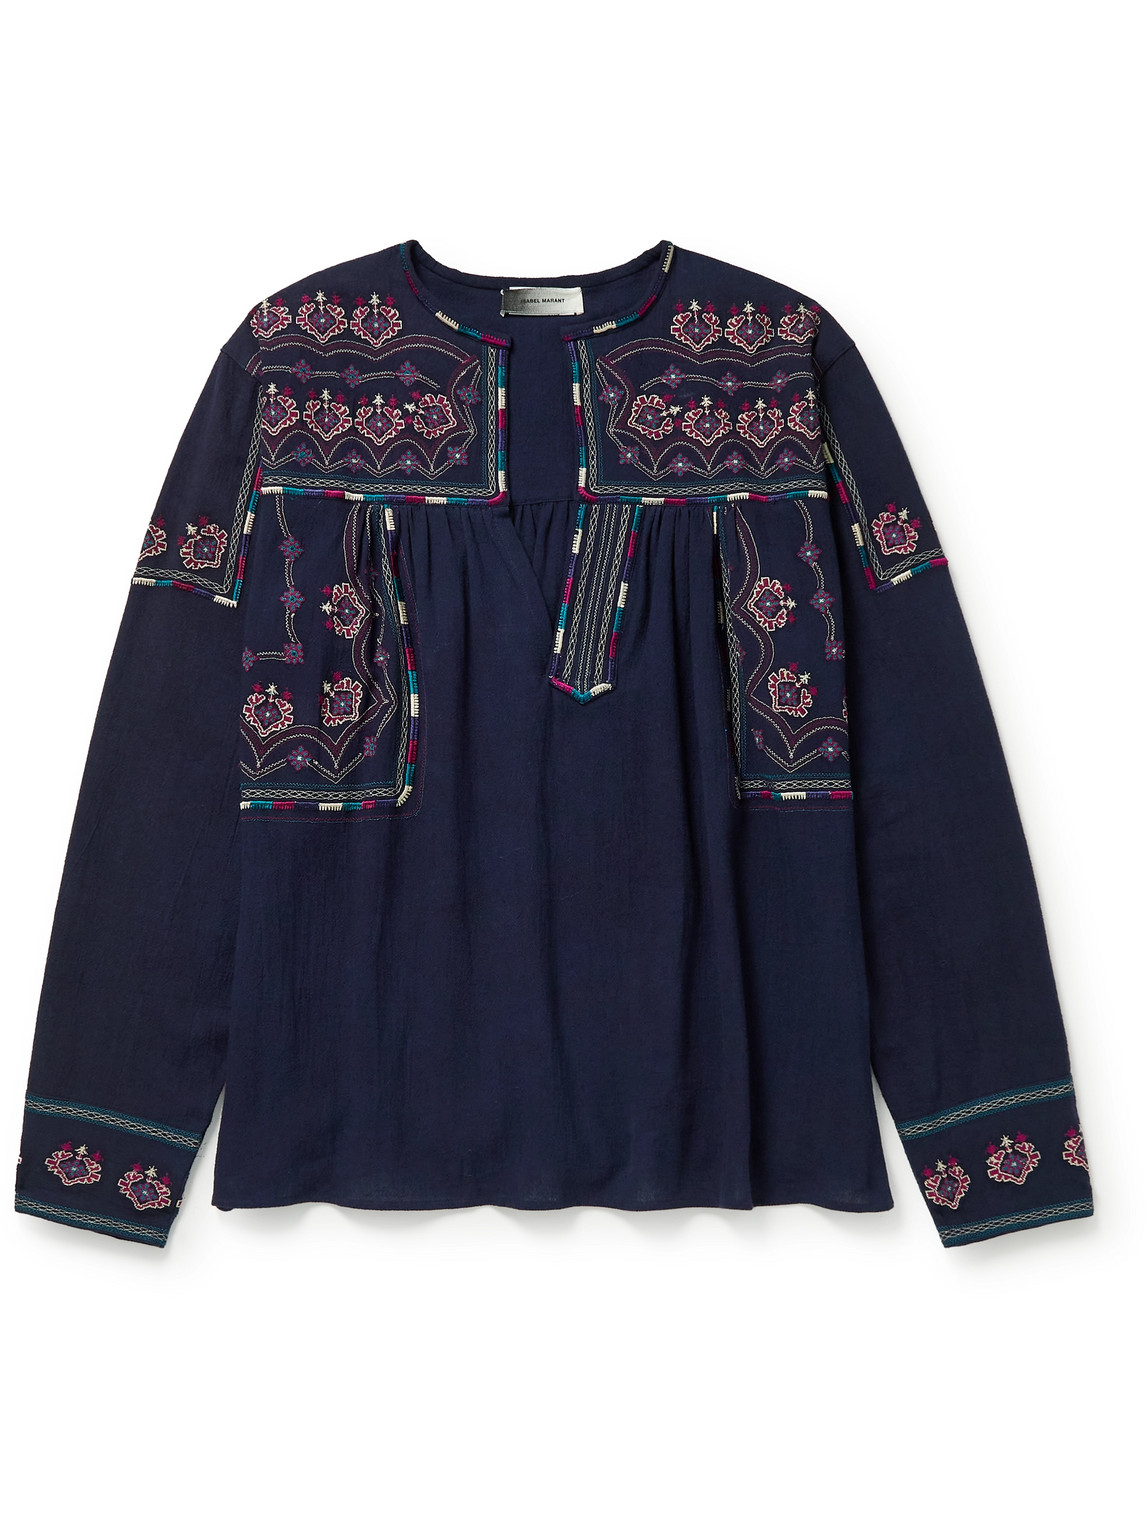 Isabel Marant Kids' Embroidered Cotton Shirt In Blue